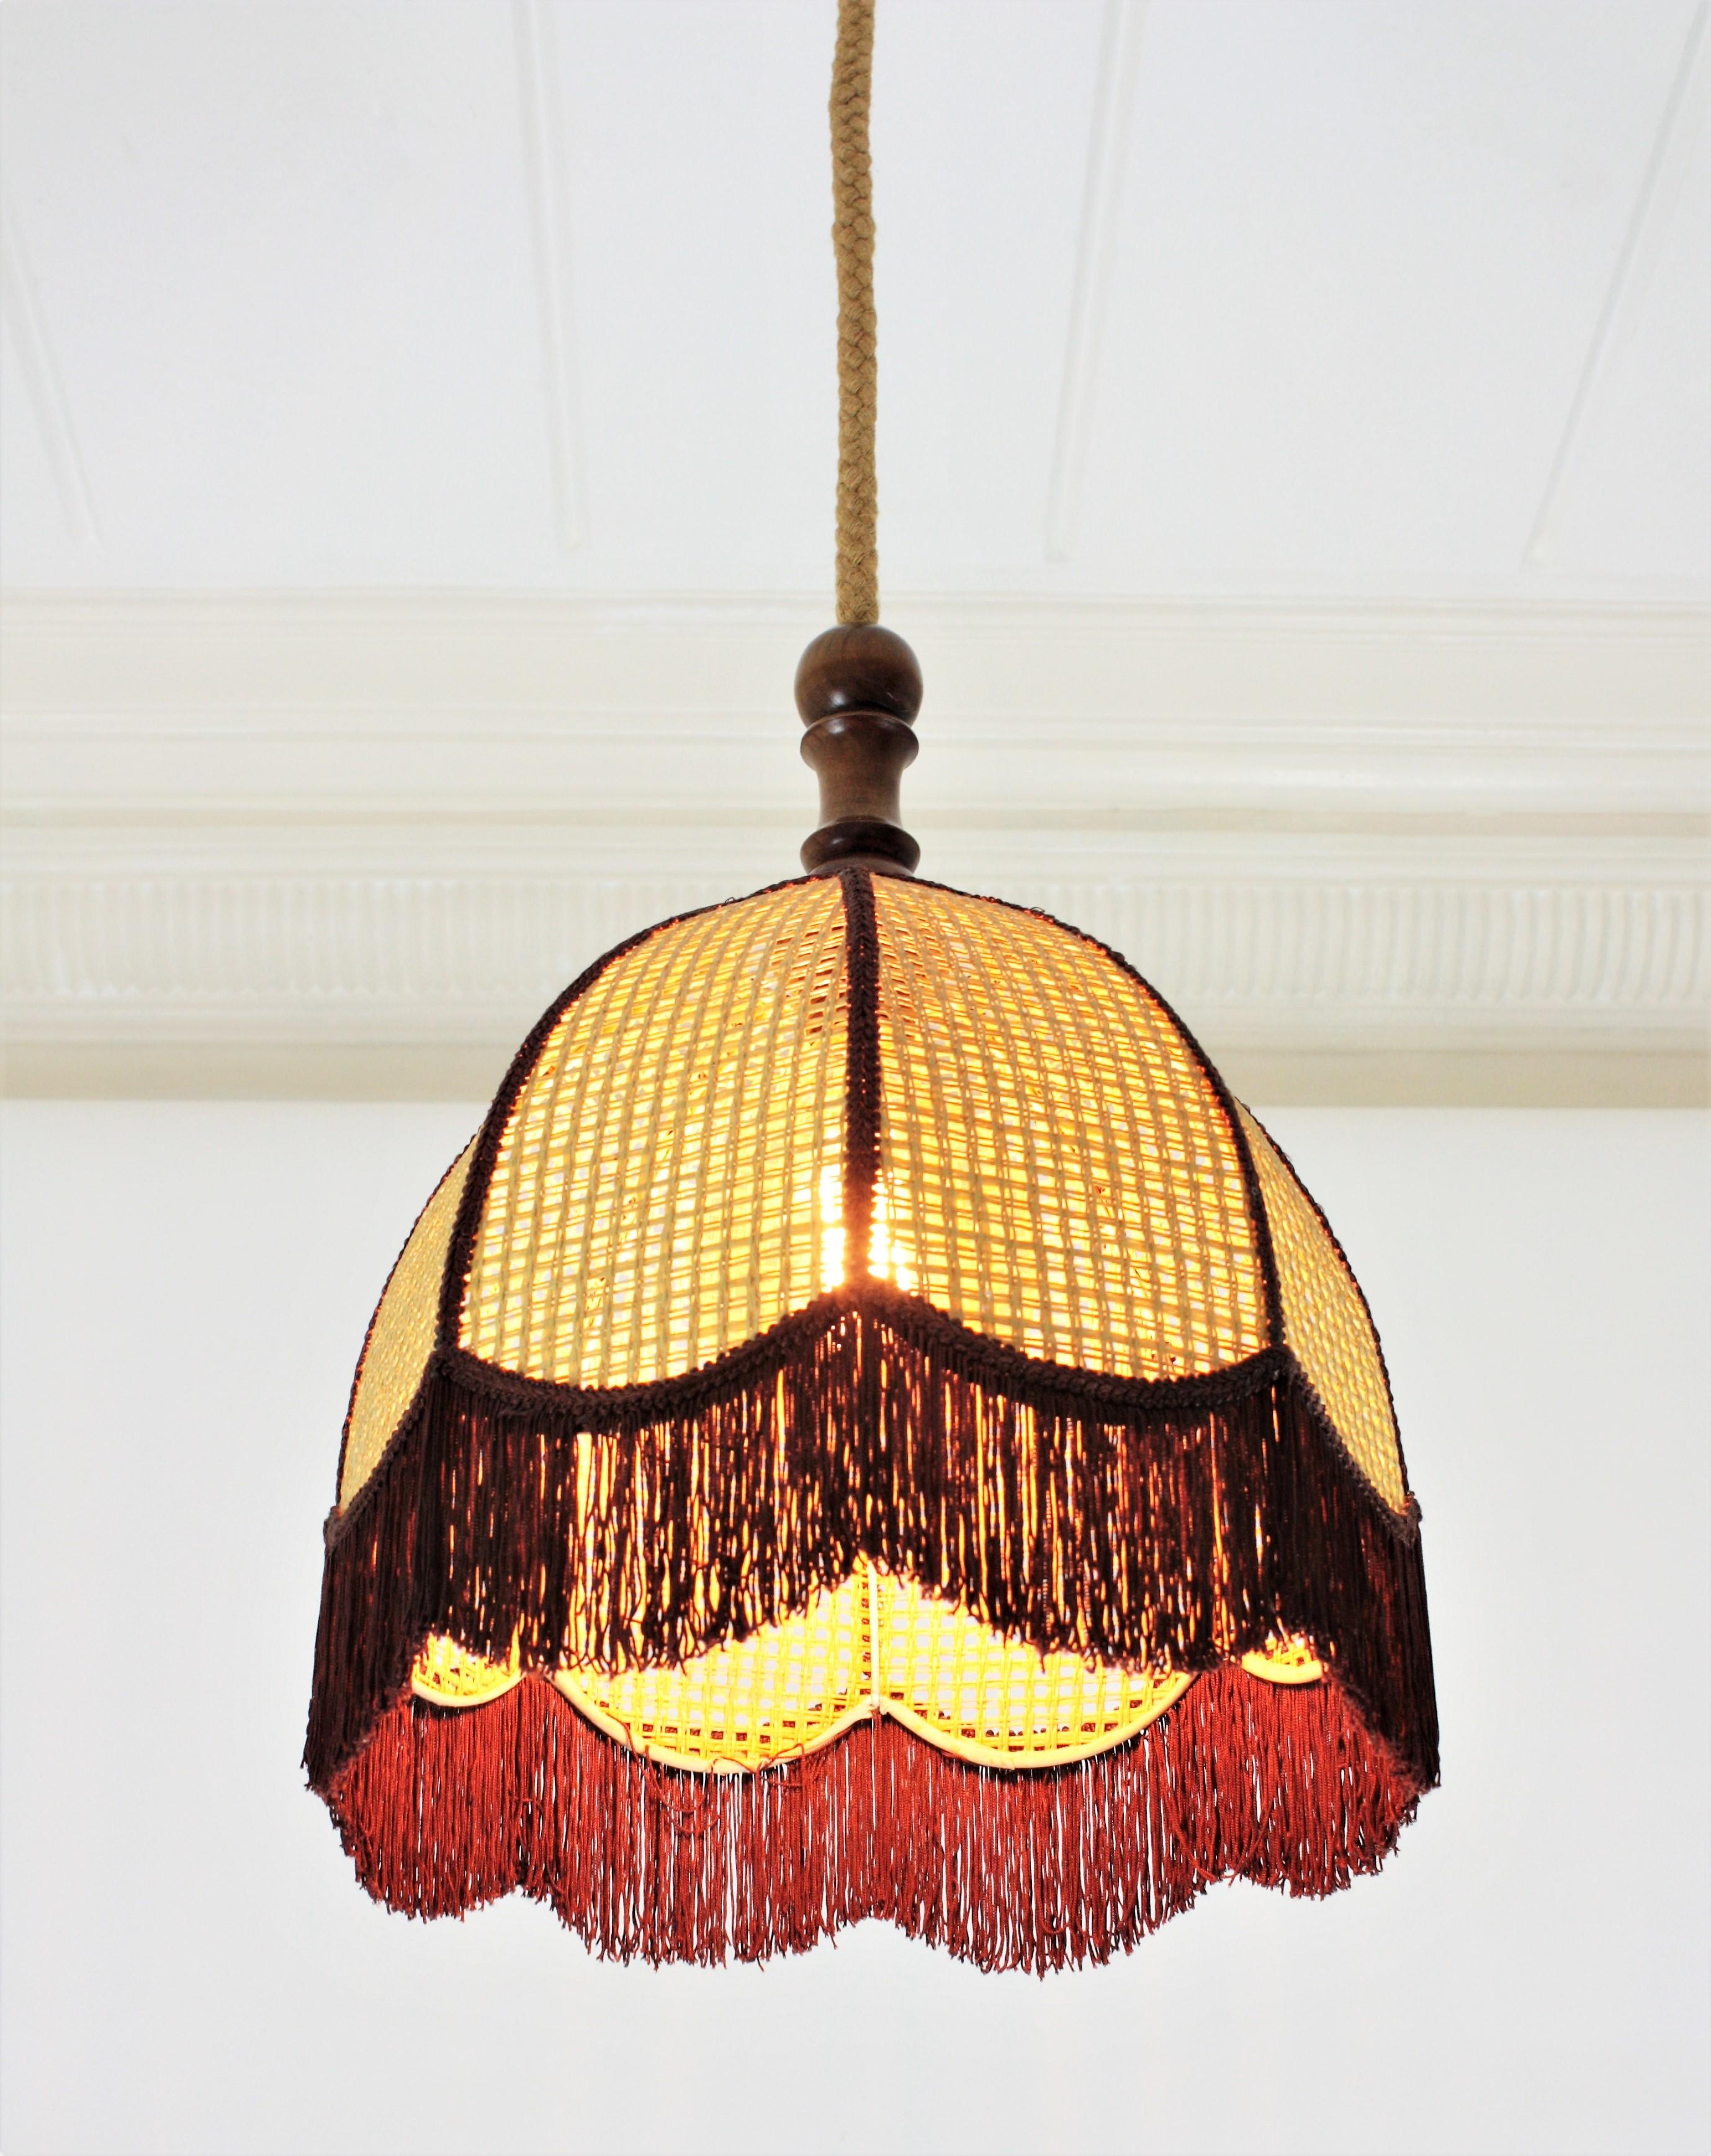 Mid-Century Modern Rattan Wicker Bell Pendant Hanging Lamp with Fringe, Spain, 1970s